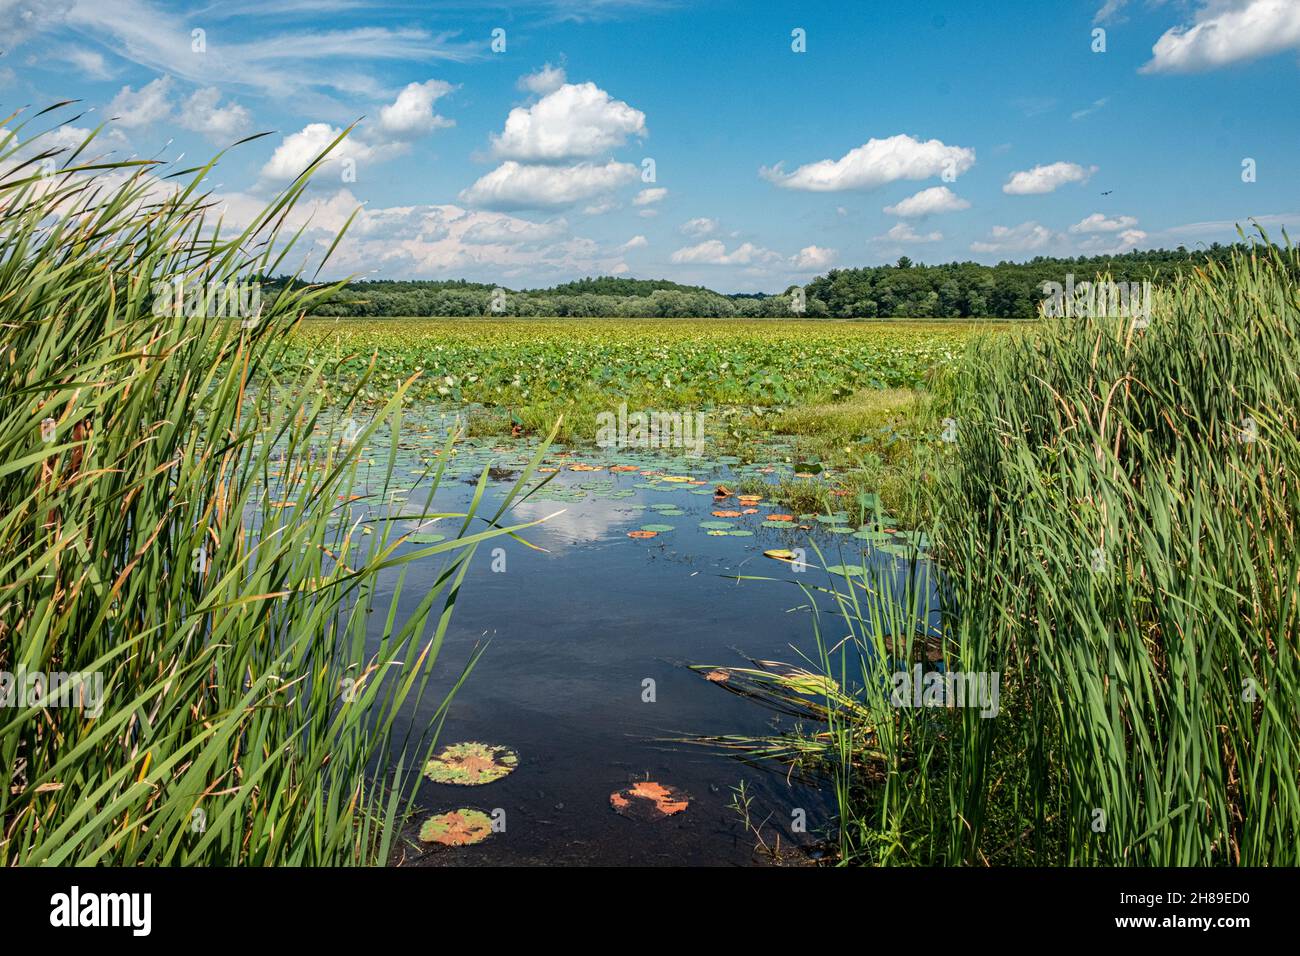 Great Meadows National Wildlife Refuge in Concord, Massachusetts Stockfoto